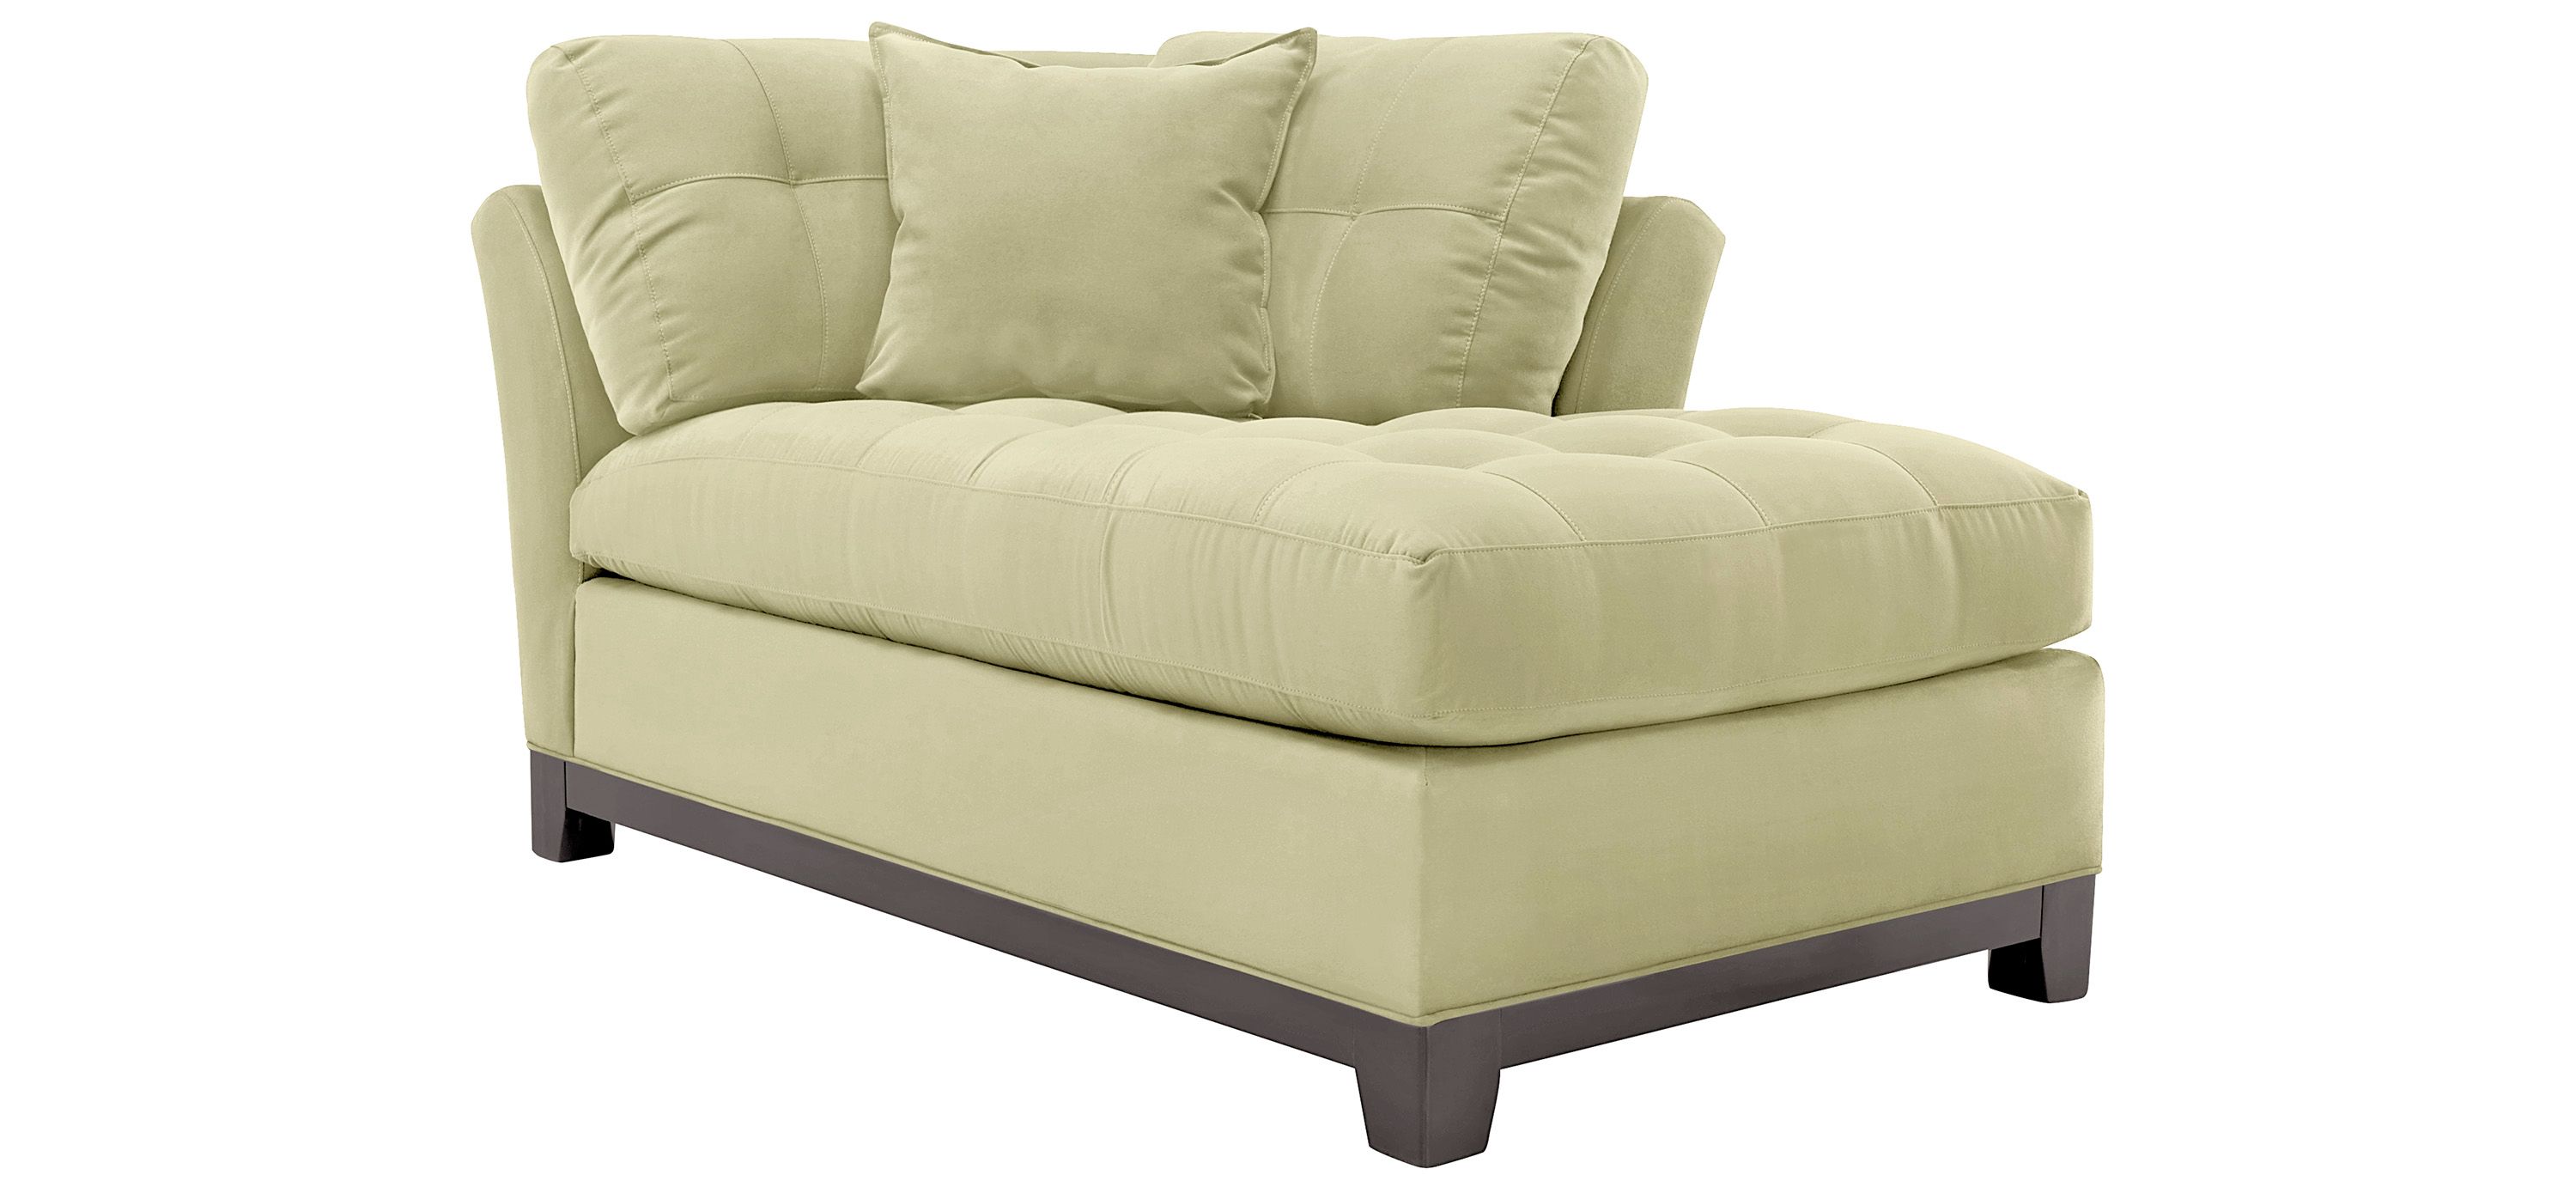 Metropolis Right-Arm-Facing Chaise Lounge